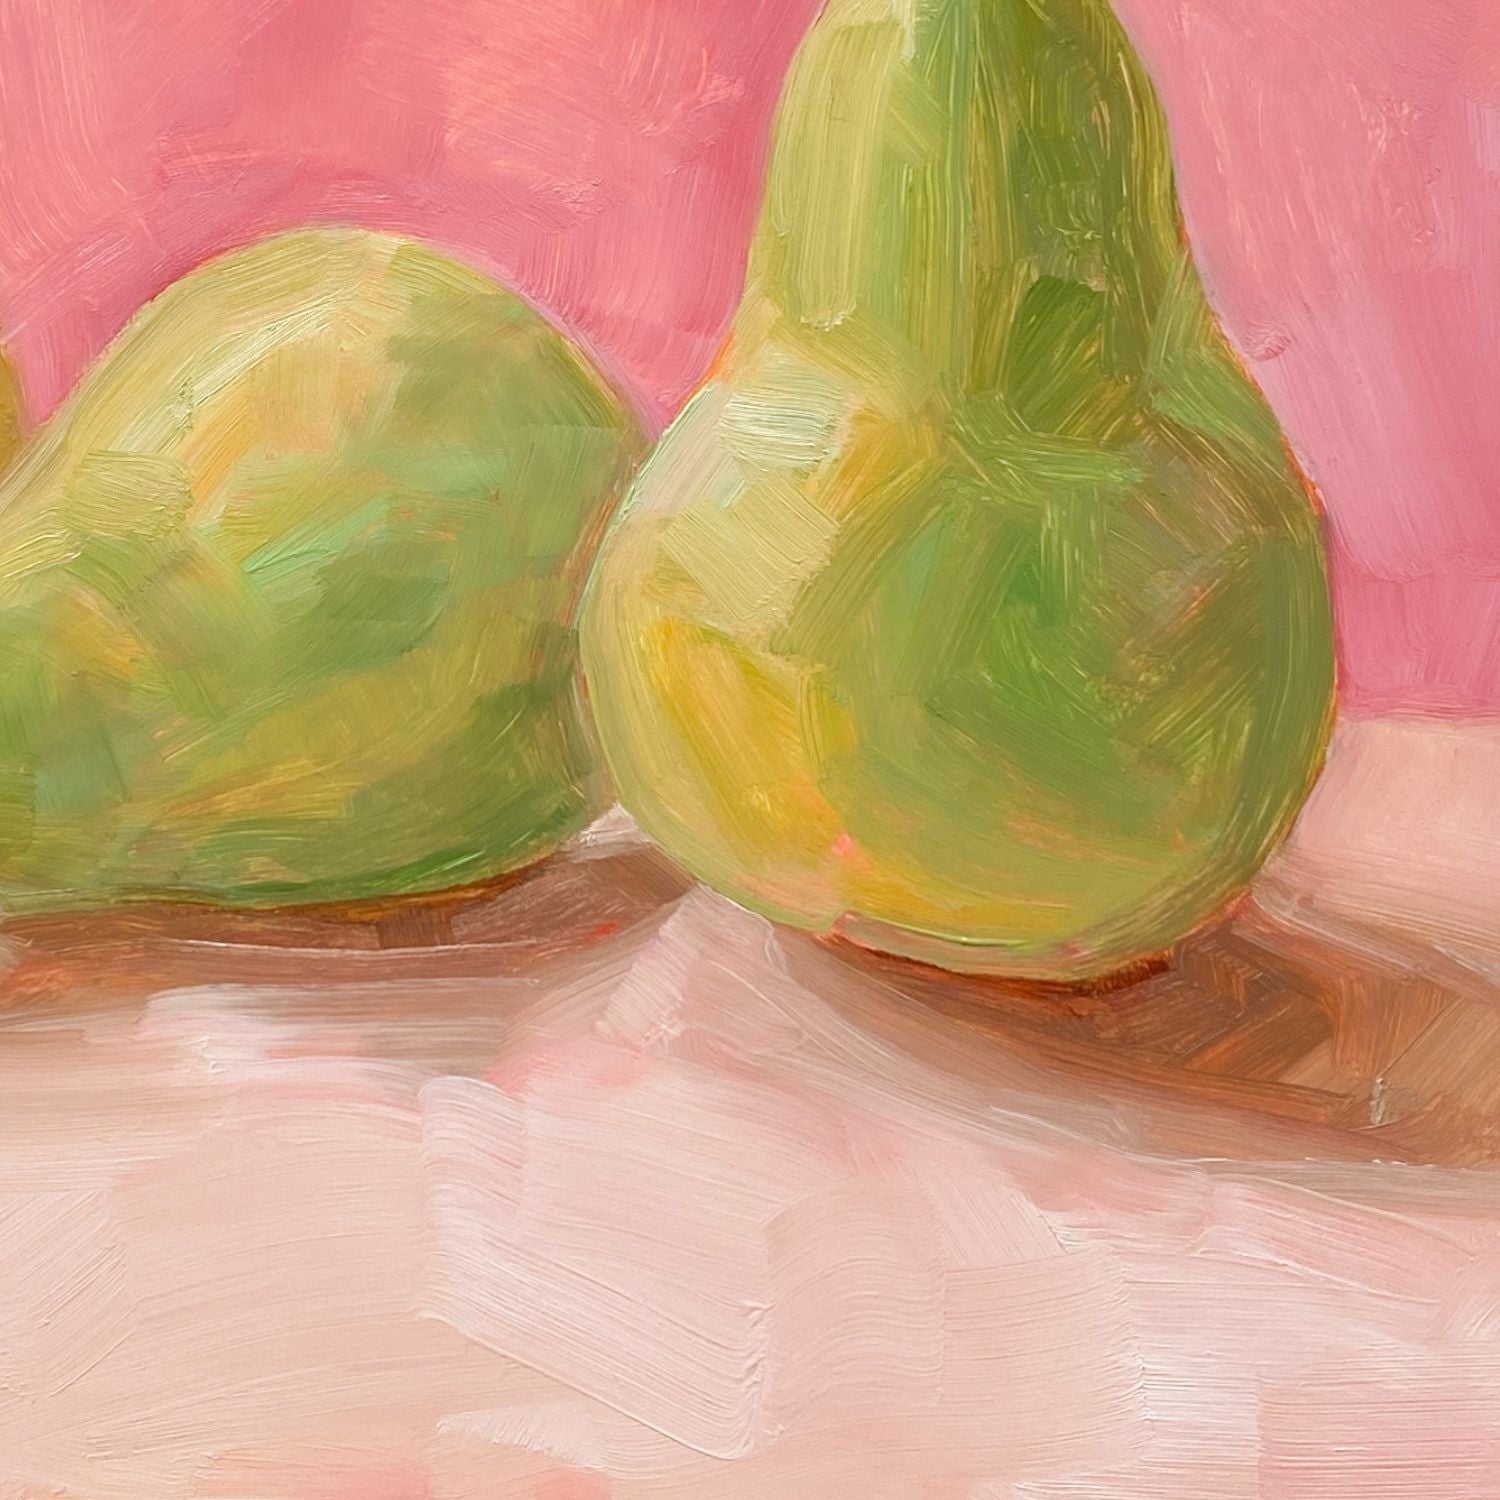 closeup of an image of an oil painting of two green pears and one yellow pear on a cream surface with a soft and warm pink background